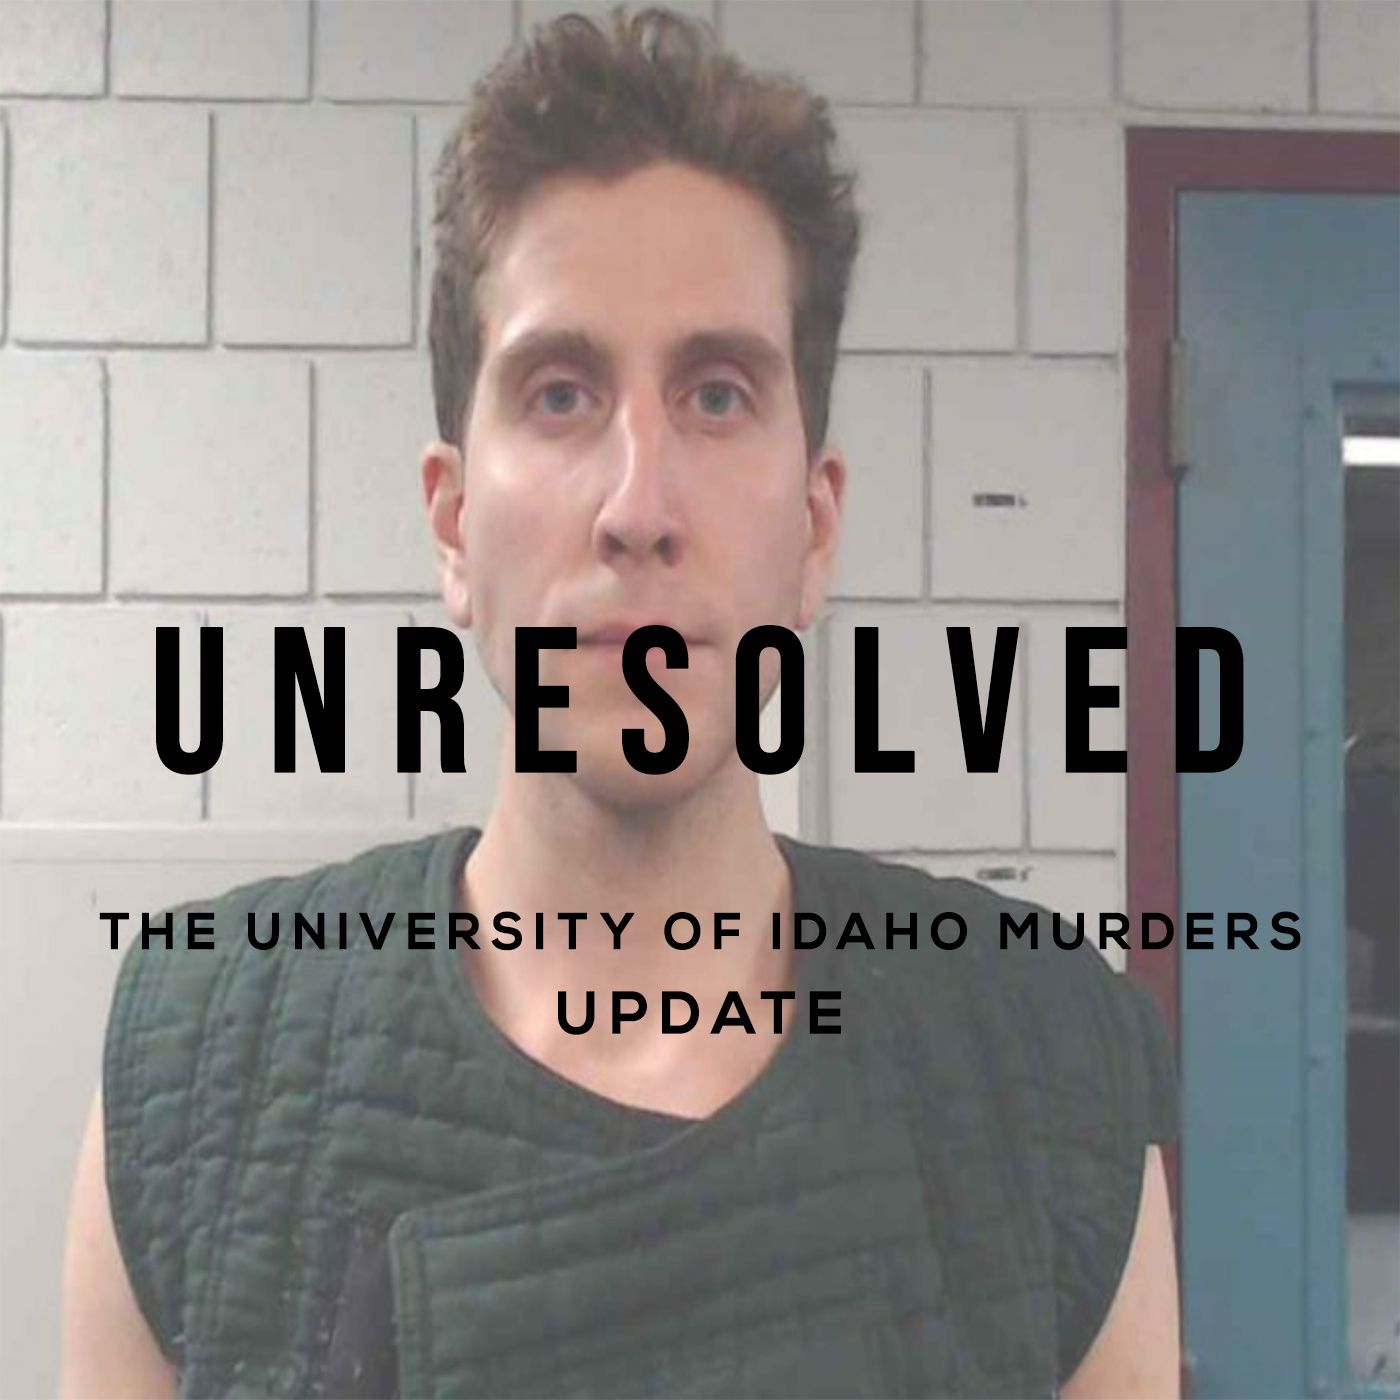 the-university-of-idaho-murders-update-unresolved-lyssna-h-r